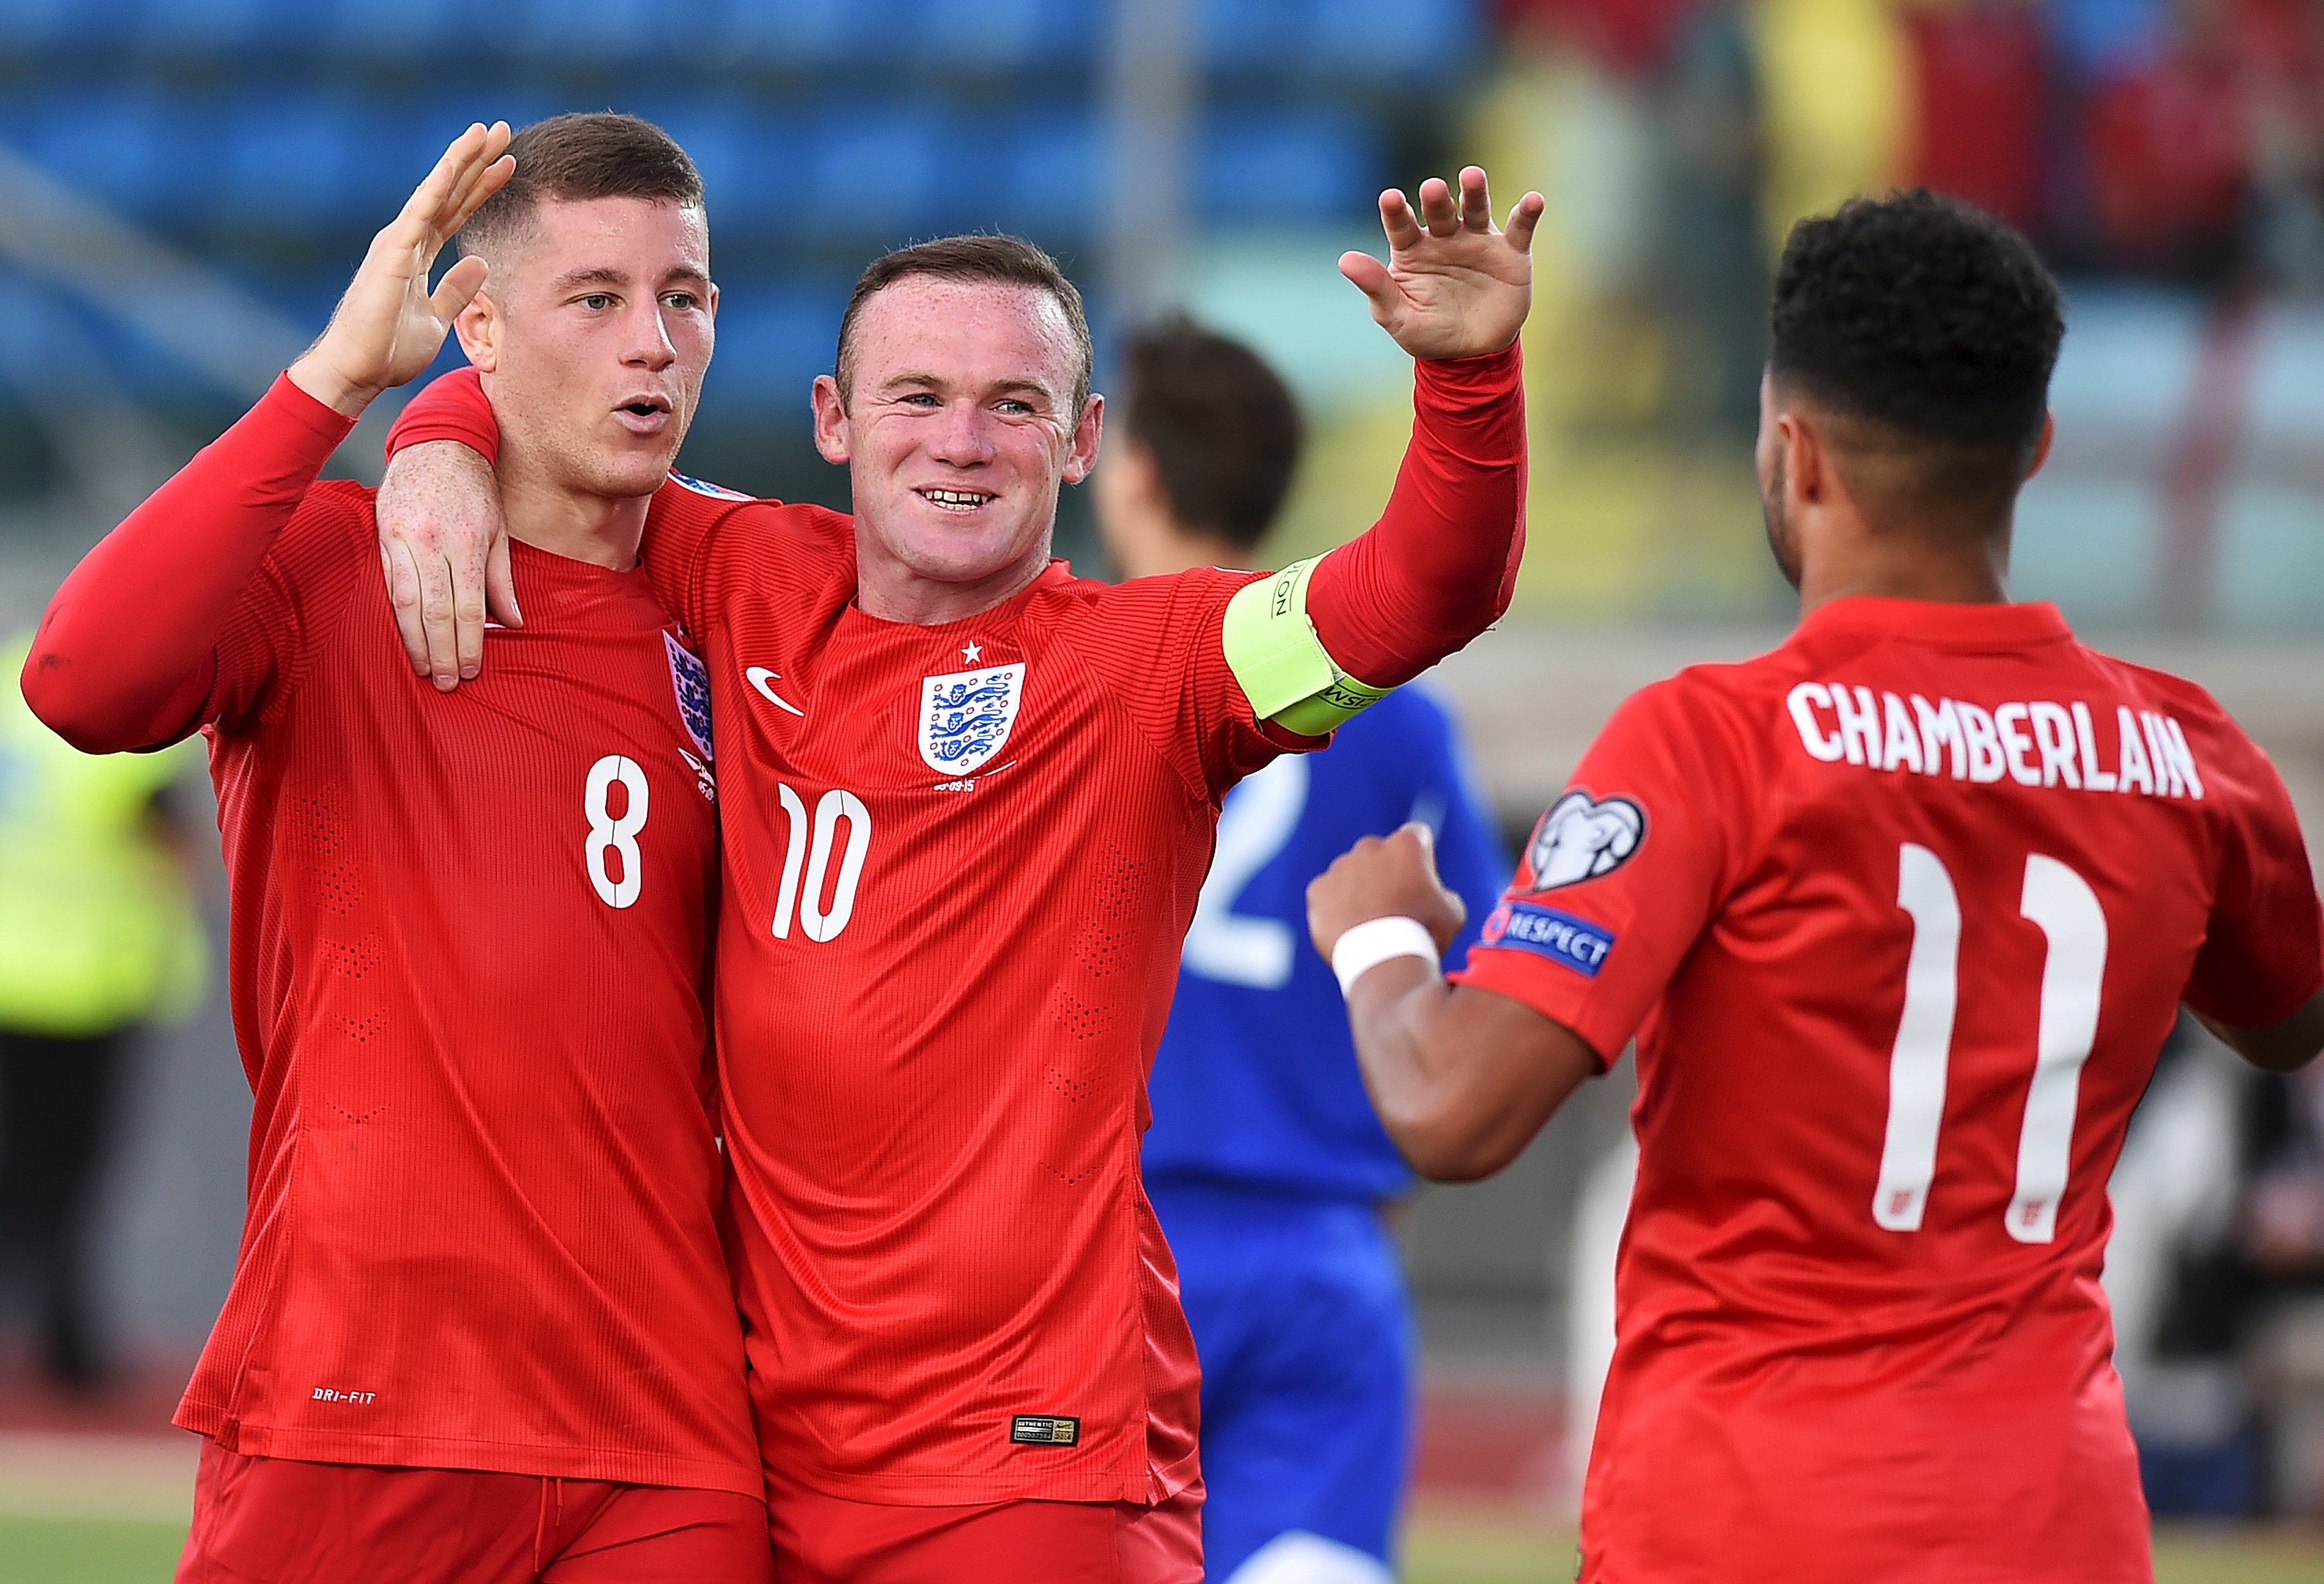 England's Ross Barkley (L) celebrates after scoring a goal with team mates Wayne Rooney (C) and Alex Oxlade-Chamberlain during their Euro 2016 qualifying soccer match against San Marino at the Olympic stadium in Serravalle, San Marino, September 5, 2015. REUTERS/Alberto Lingria